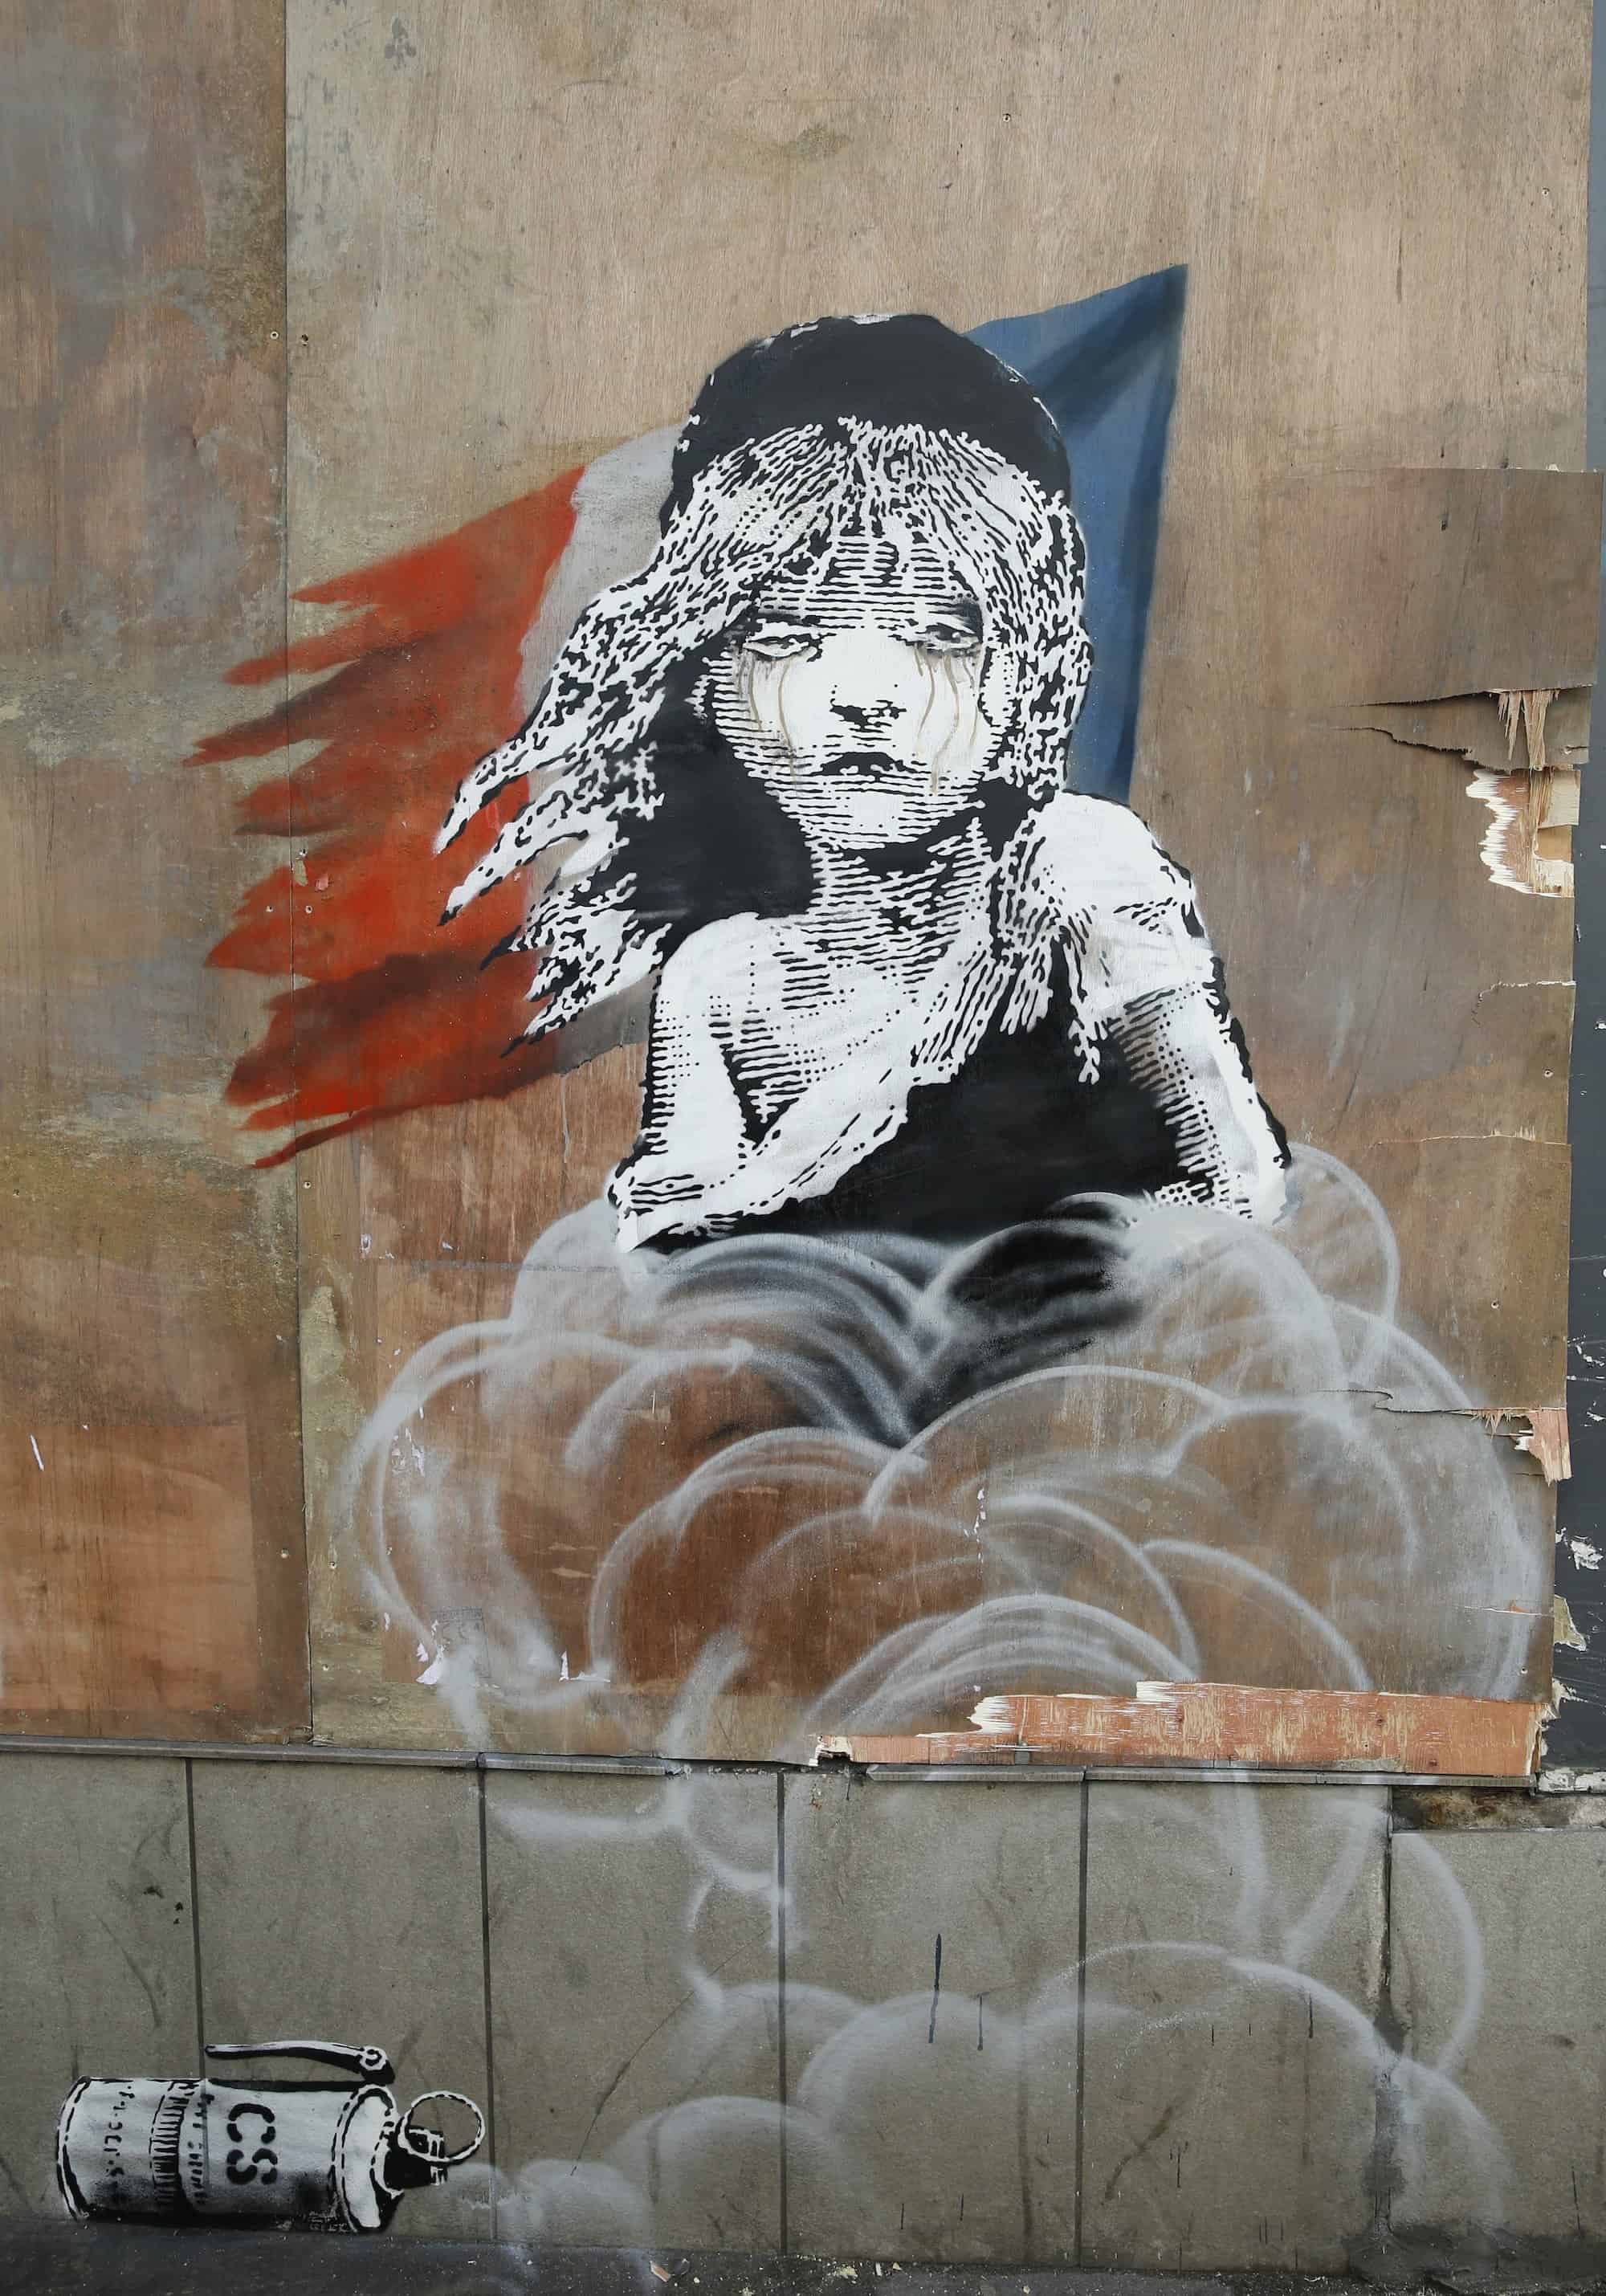 New Banksy Mural In London Protests The Use Of Tear Gas On Refugees